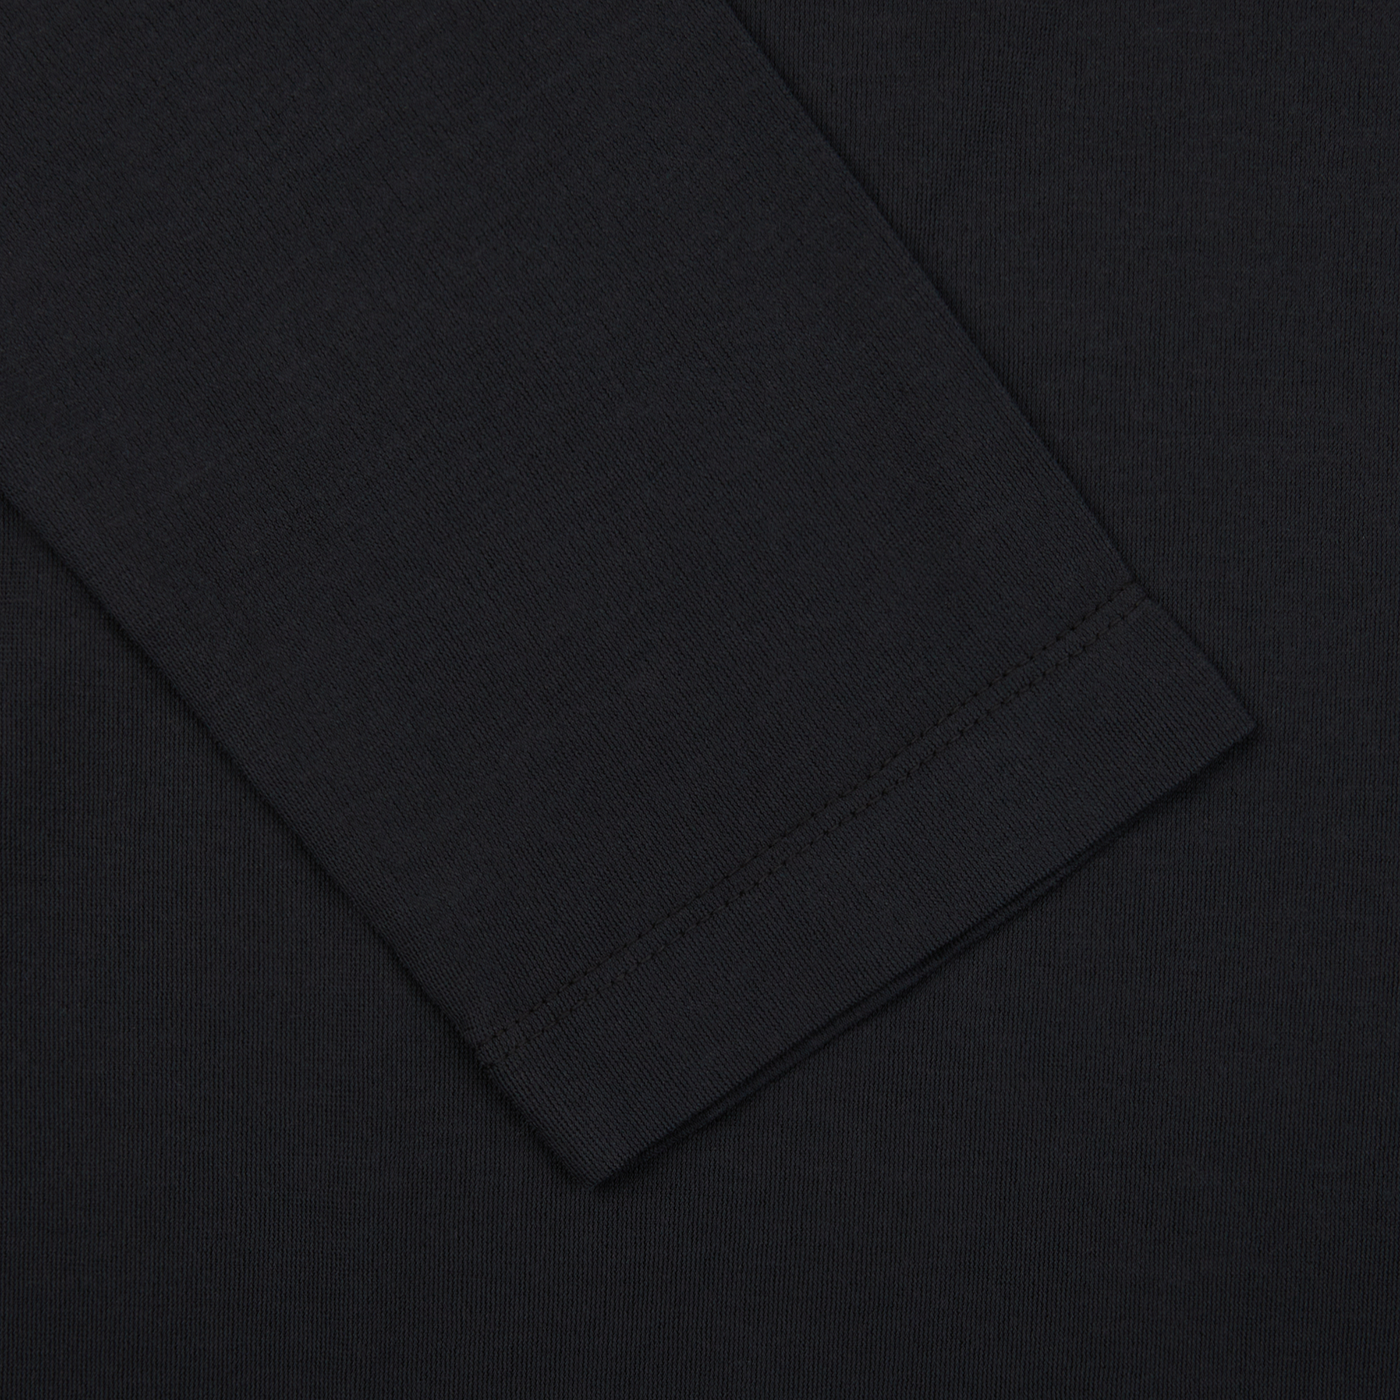 A close-up of a Drumohr Black Ice Cotton LS T-Shirt from Italy.